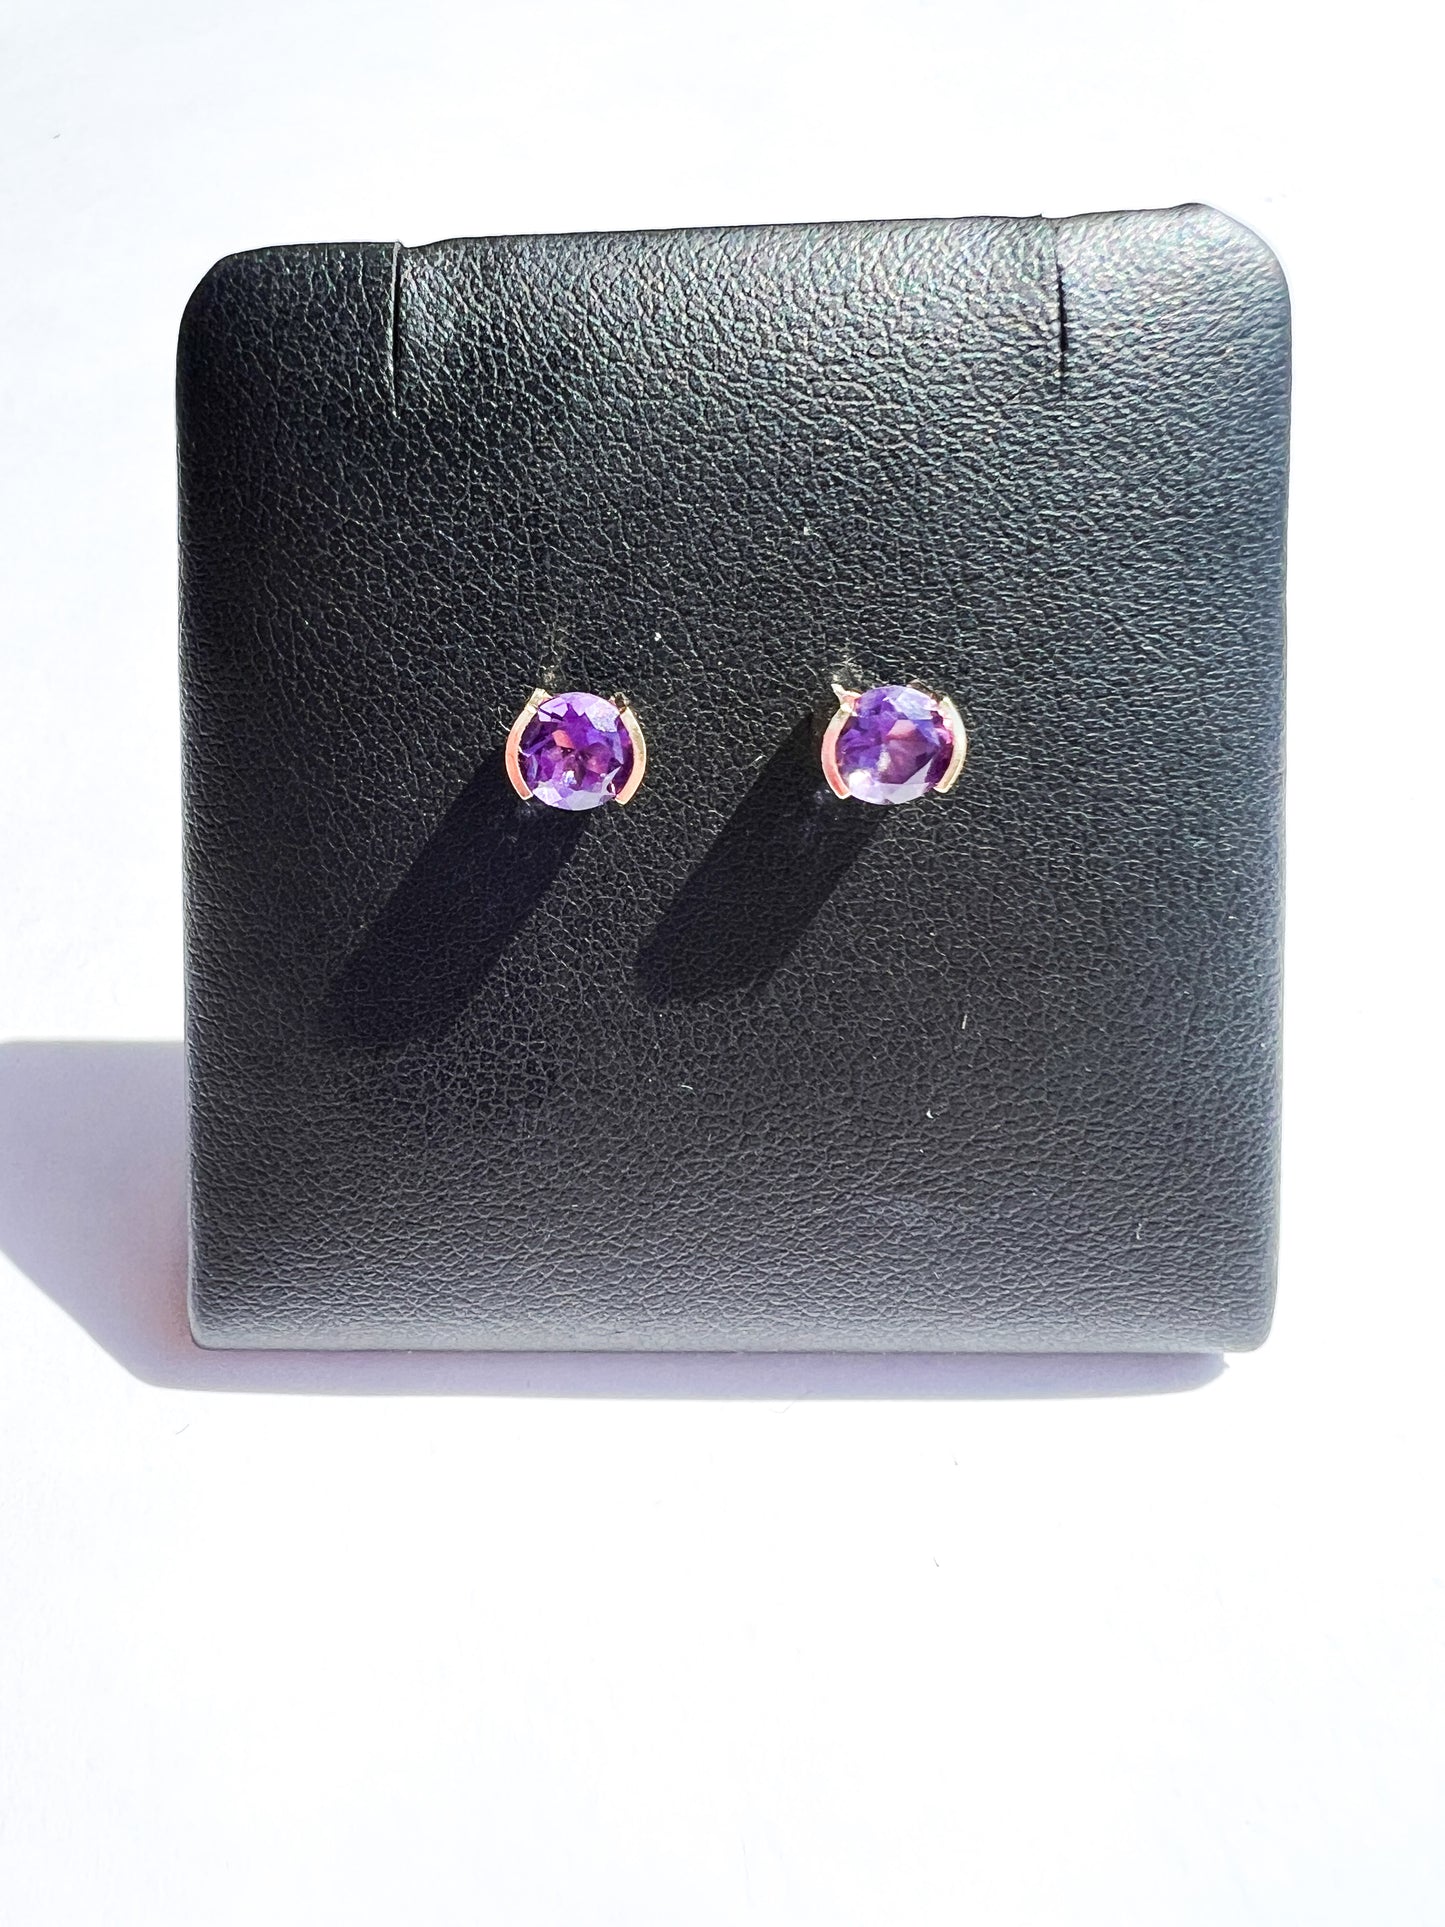 14k Yellow Gold and Amethyst Stud Earrings